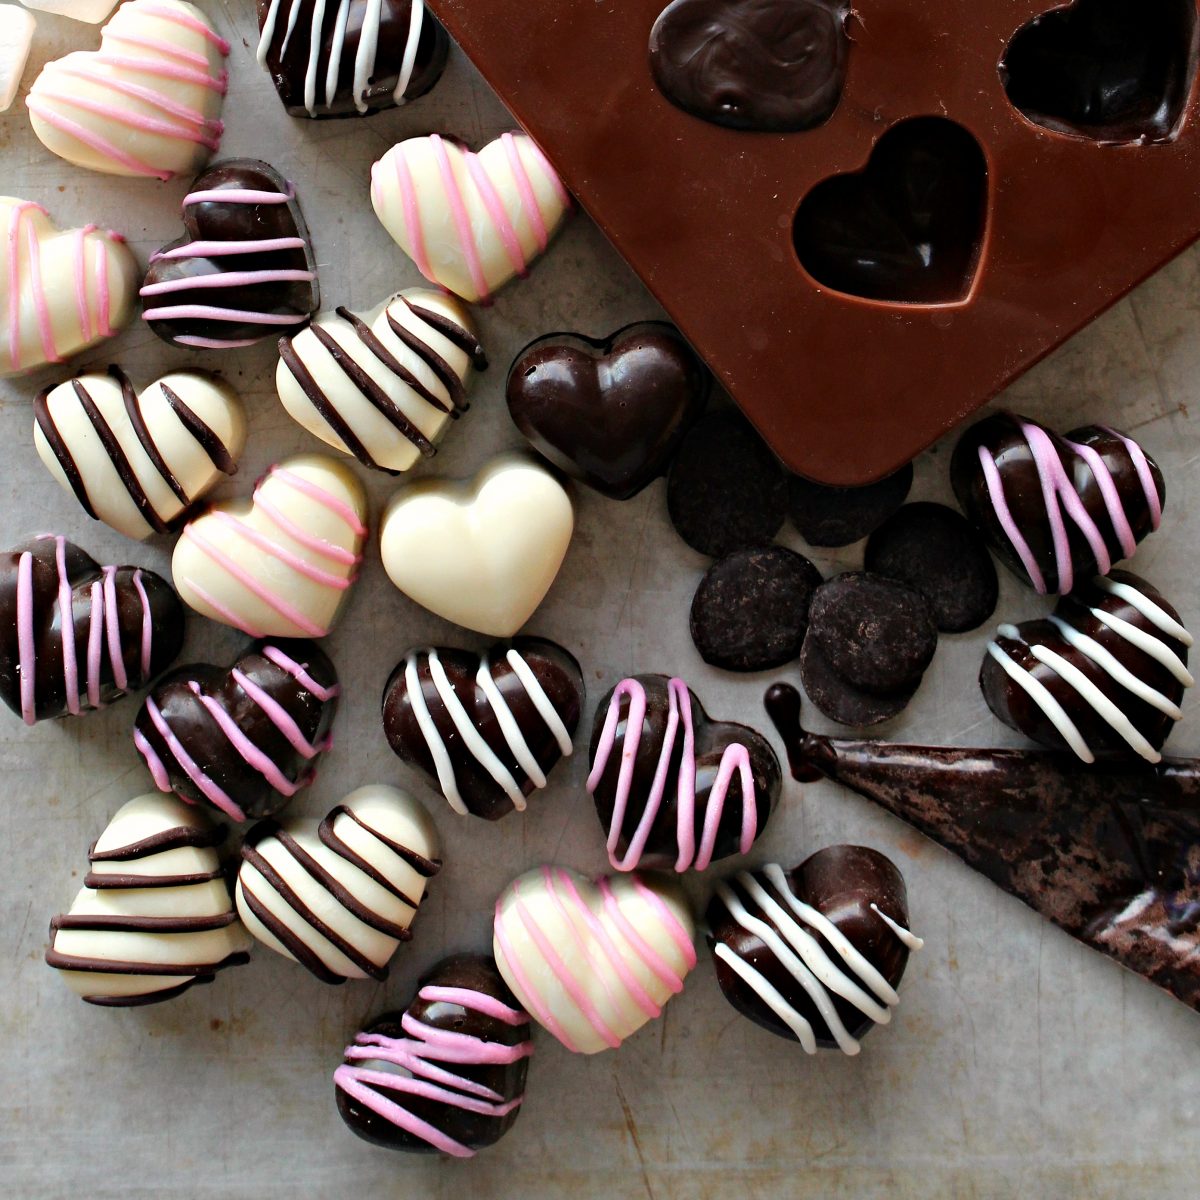 Candies outside of mold in dark and white chocolate with pink or chocolate stripes.